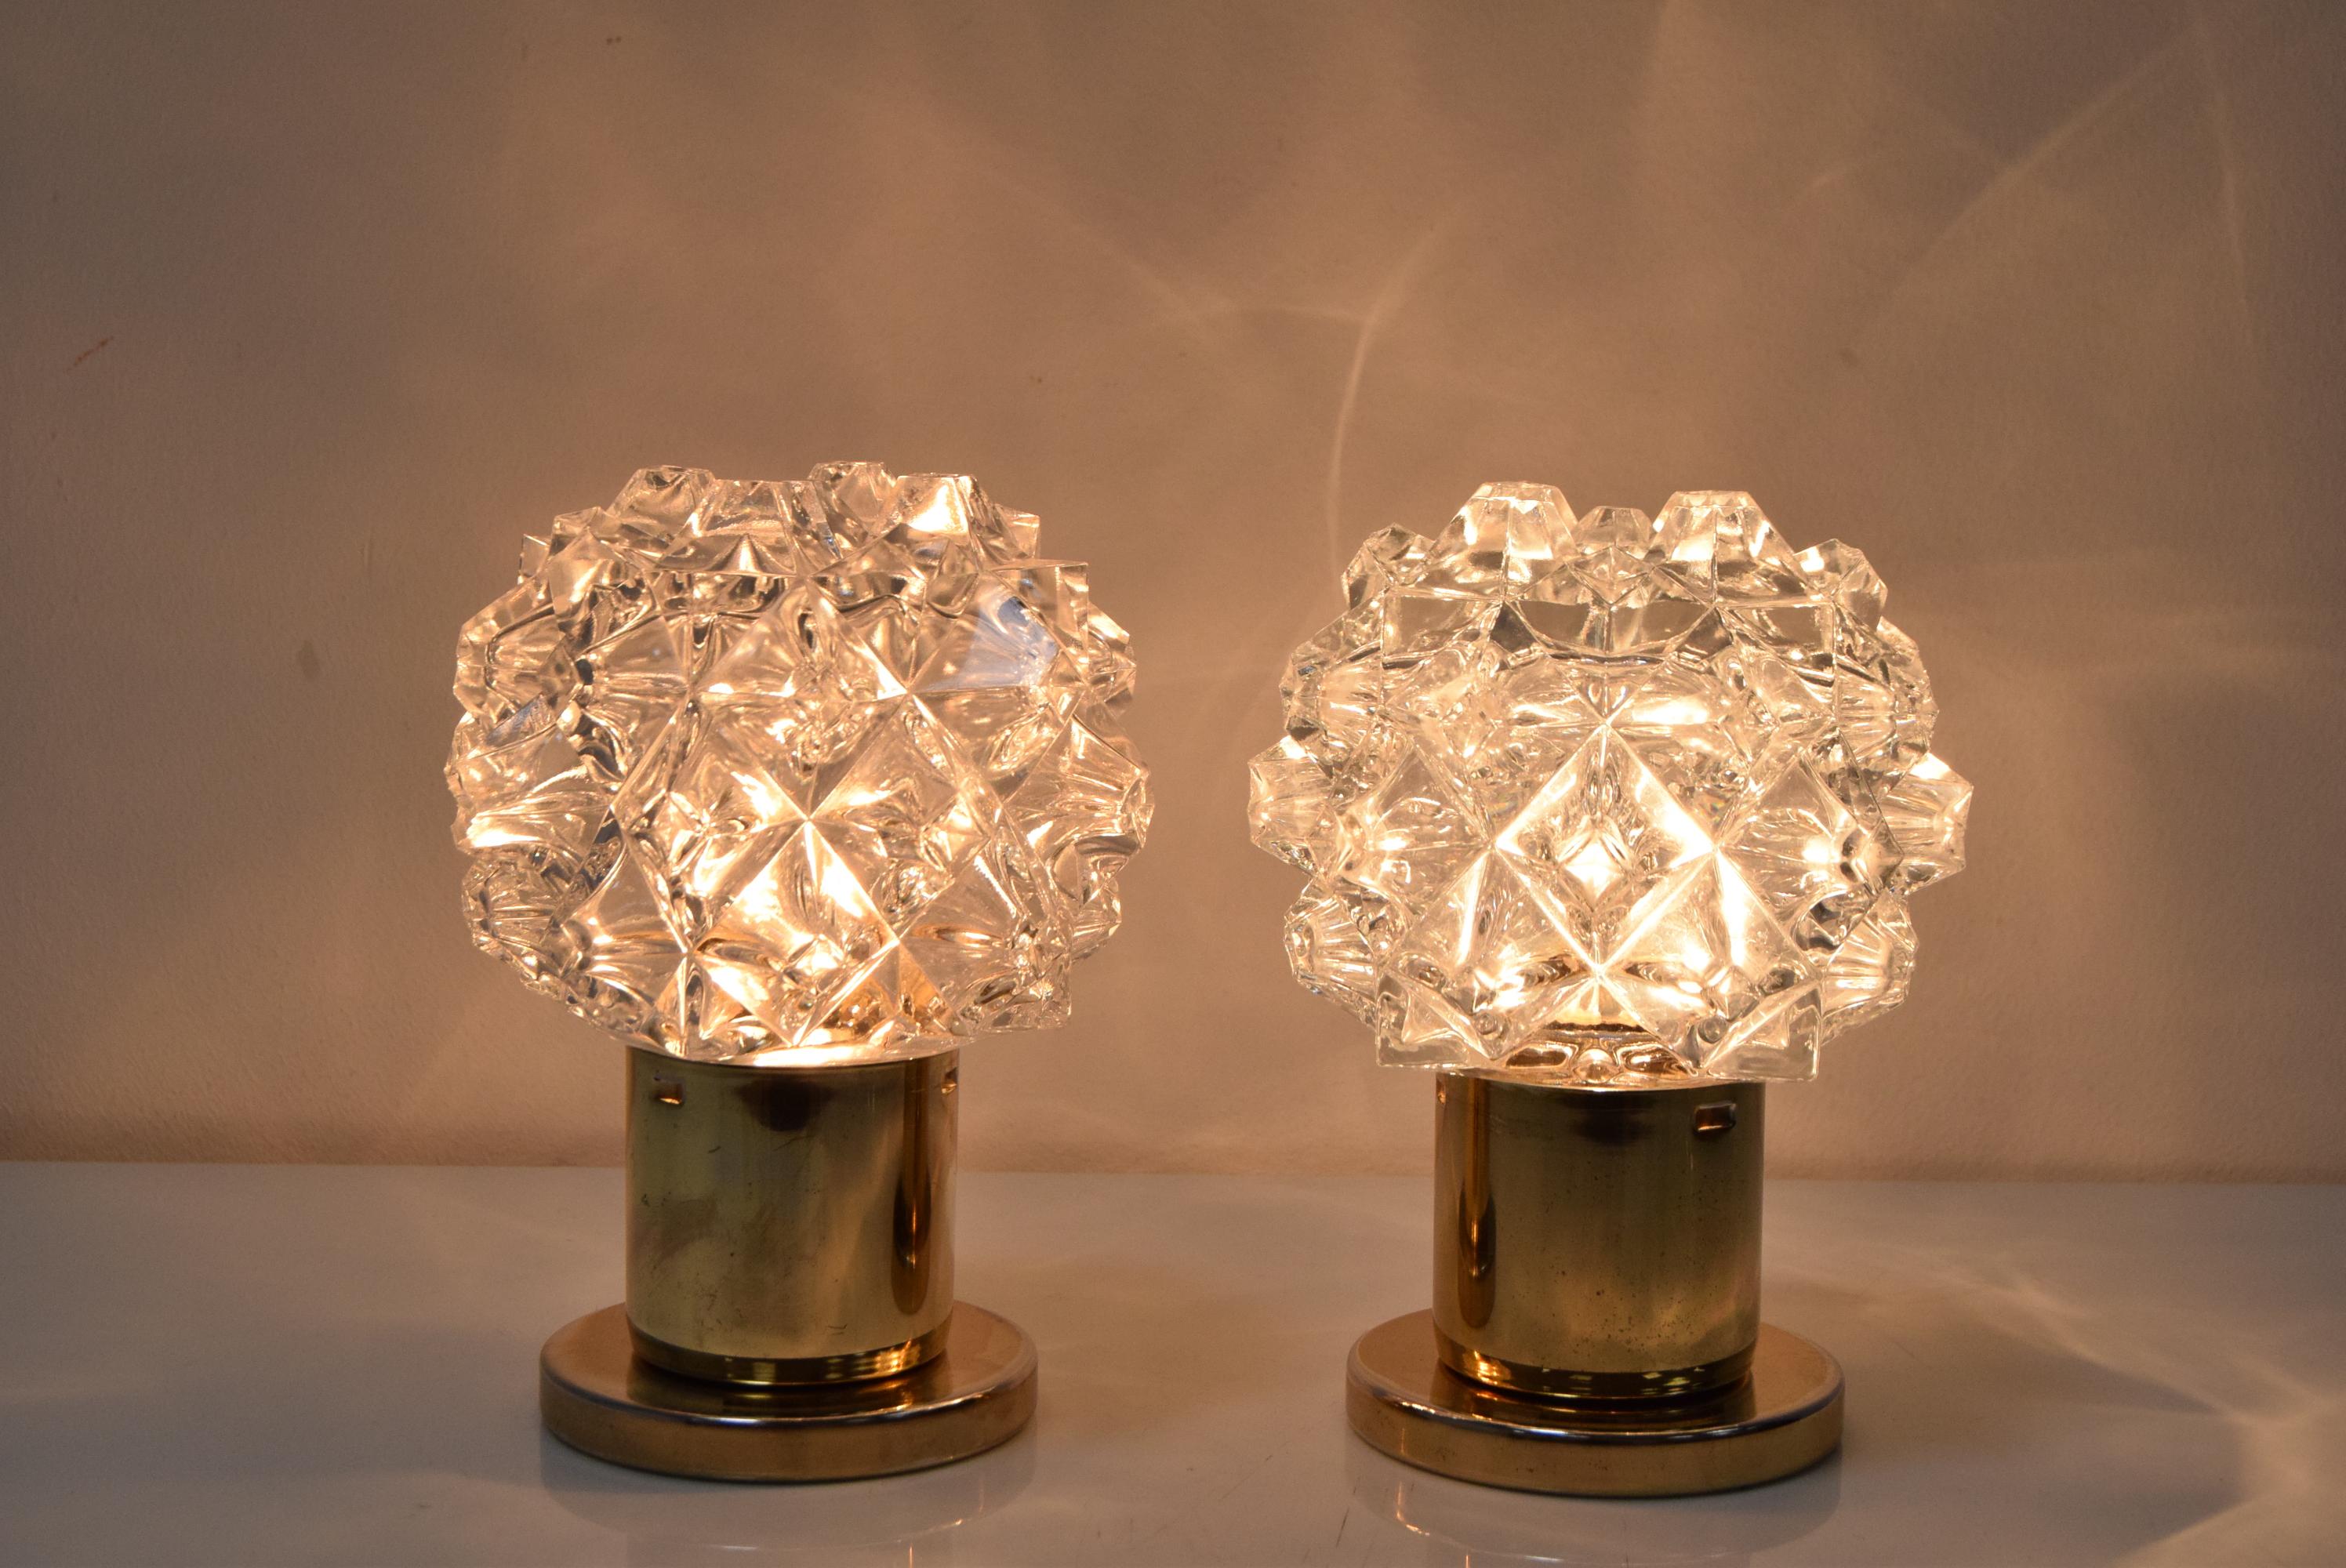 Pair of Design Table or Wall Lamps by Preciosa, Kamenicky Senov, 1960's. For Sale 3